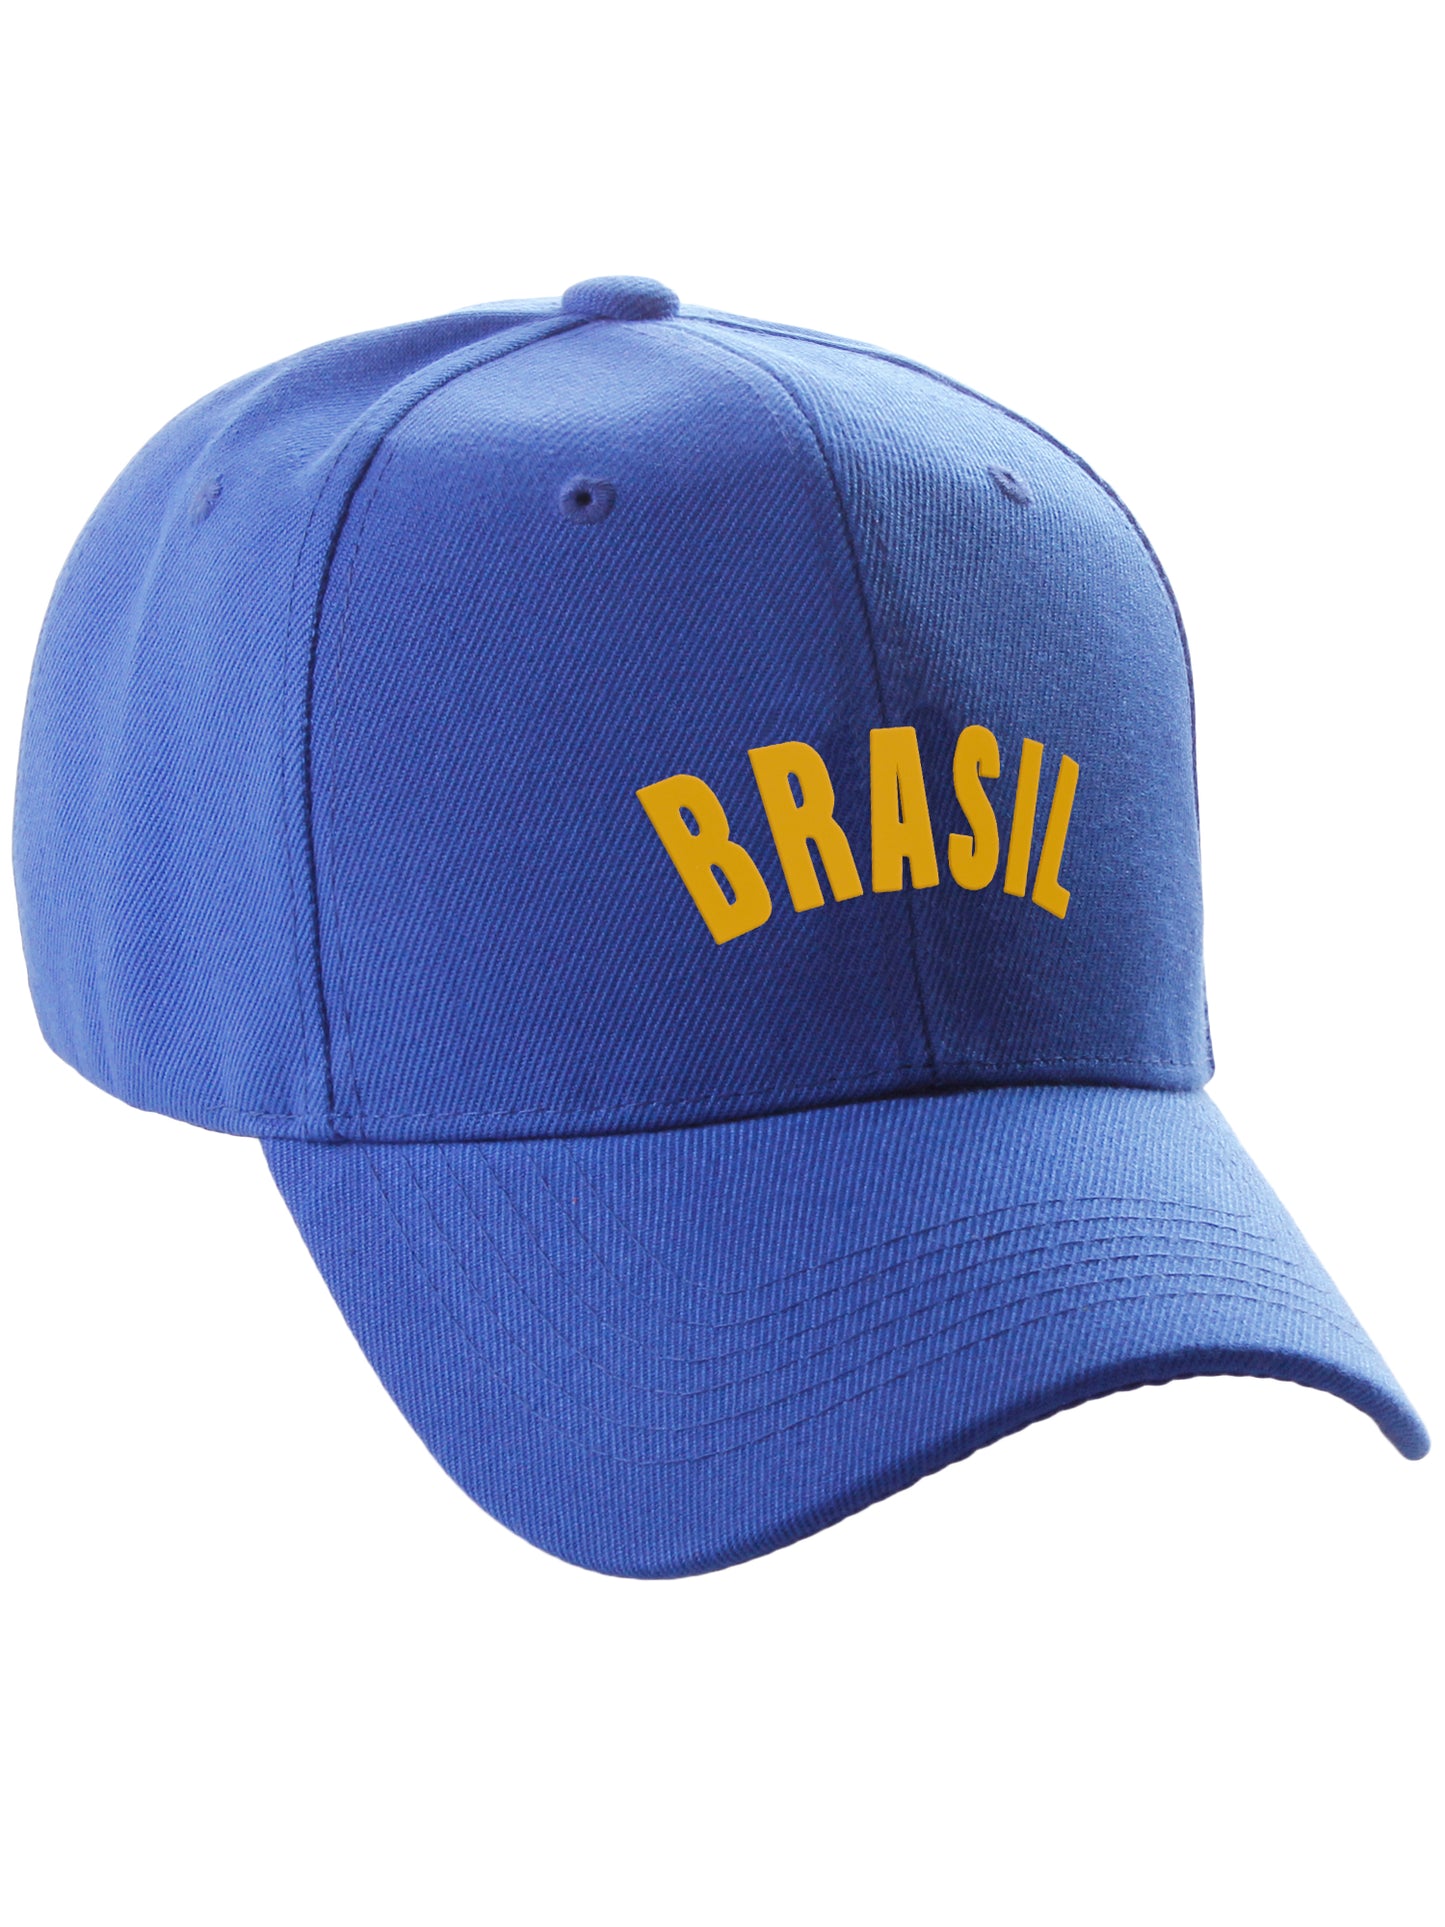 Daxton International World Countries Baseball Hat Cap Arch Letters